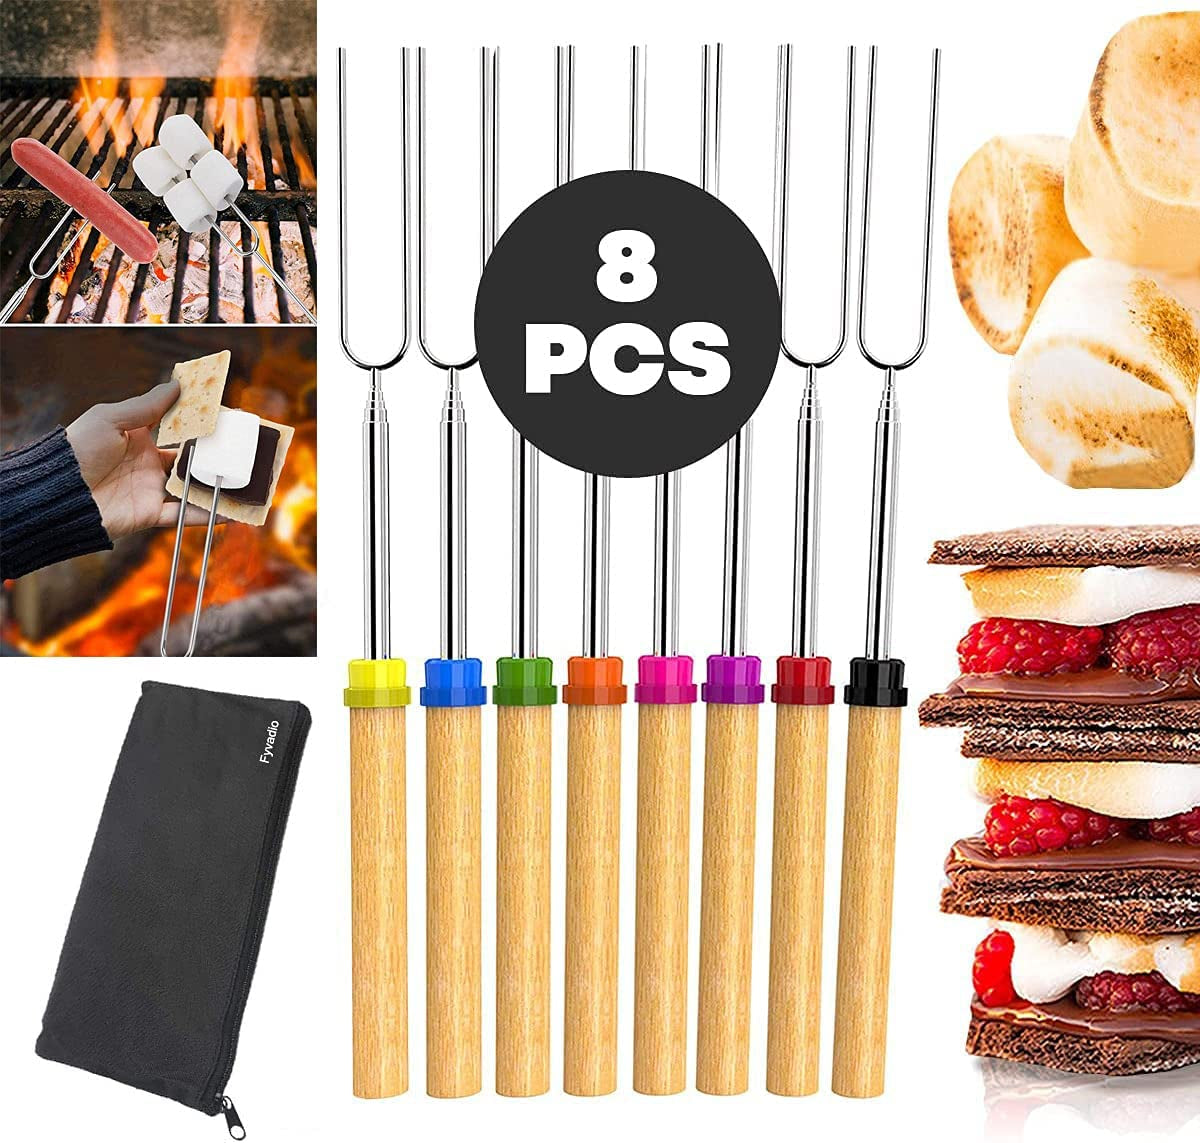 Fyvadio, Marshmallow Roasting Sticks, Fyvadio Set of 8 Telescoping Smores Skewers & Hot Dog Forks with Wooden Handle for Fire Pit Campfire - 32 Inch Stainless Steel BBQ Kit for Outdoor Camping